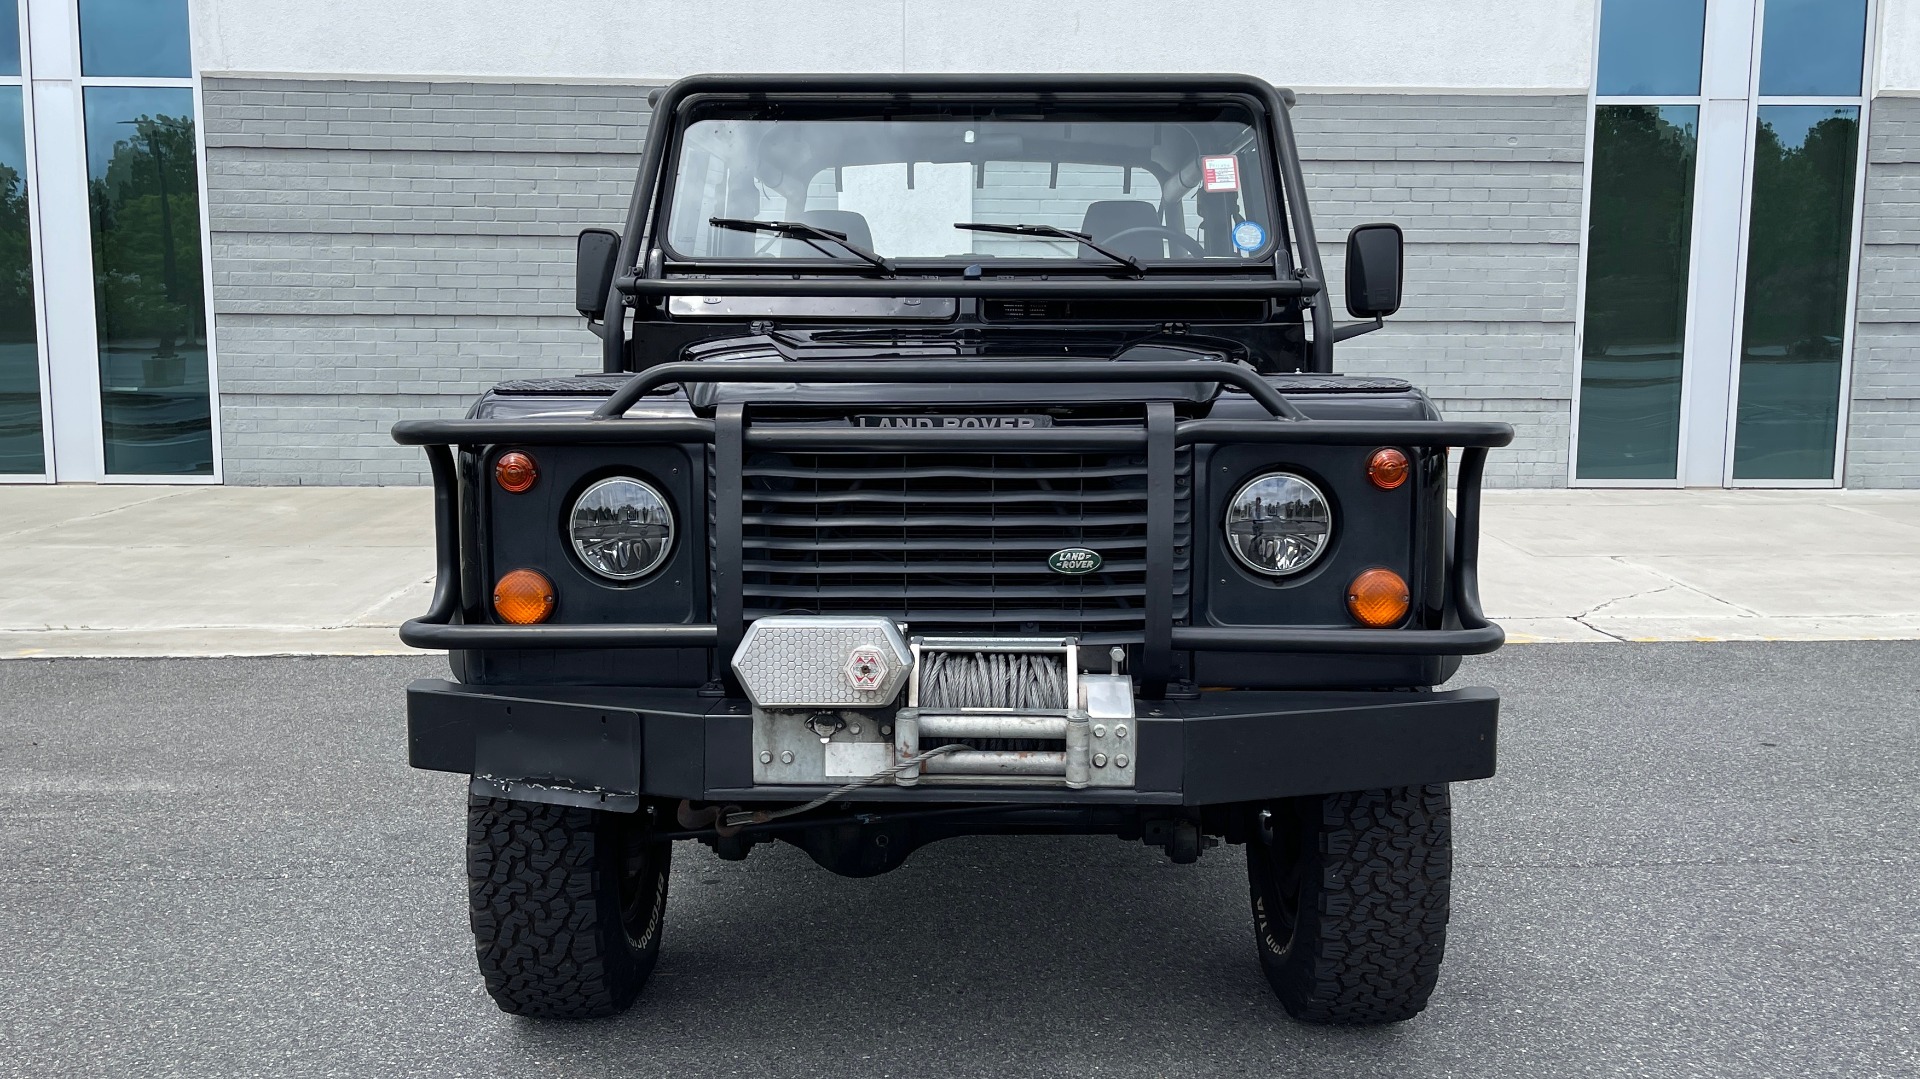 Used 1995 Land Rover DEFENDER 90 4x4 / 3.9L V8 / SOFT-TOP / 5-SPD MANUAL / RUNS GREAT for sale Sold at Formula Imports in Charlotte NC 28227 6